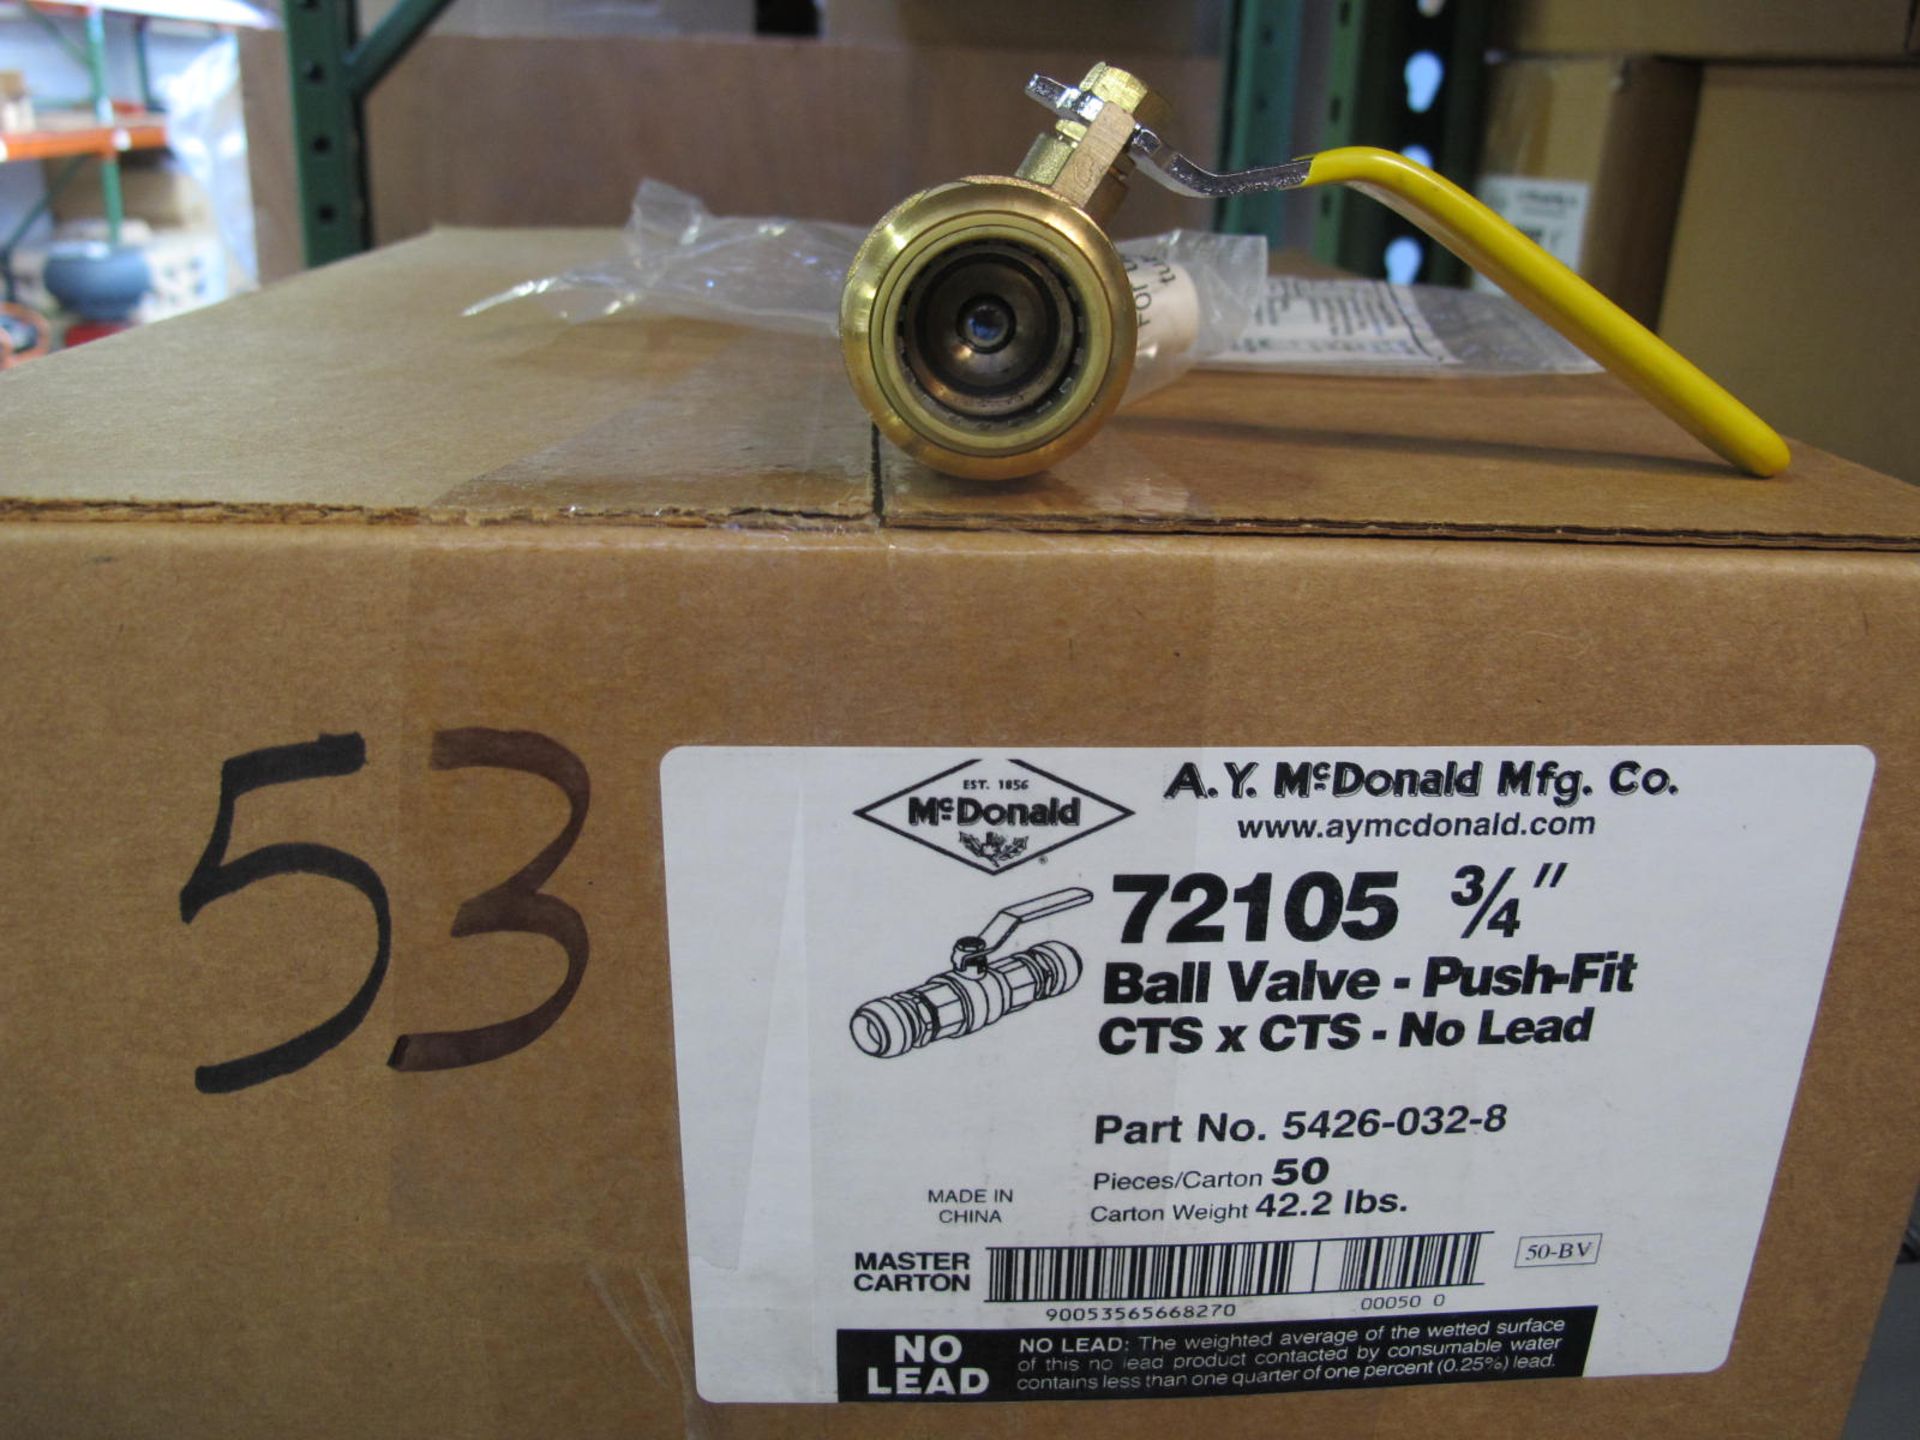 Lot Approx. (50 Pcs.) 3/4'' Ball Valve Push-Fit CTS x CTS - Image 2 of 2